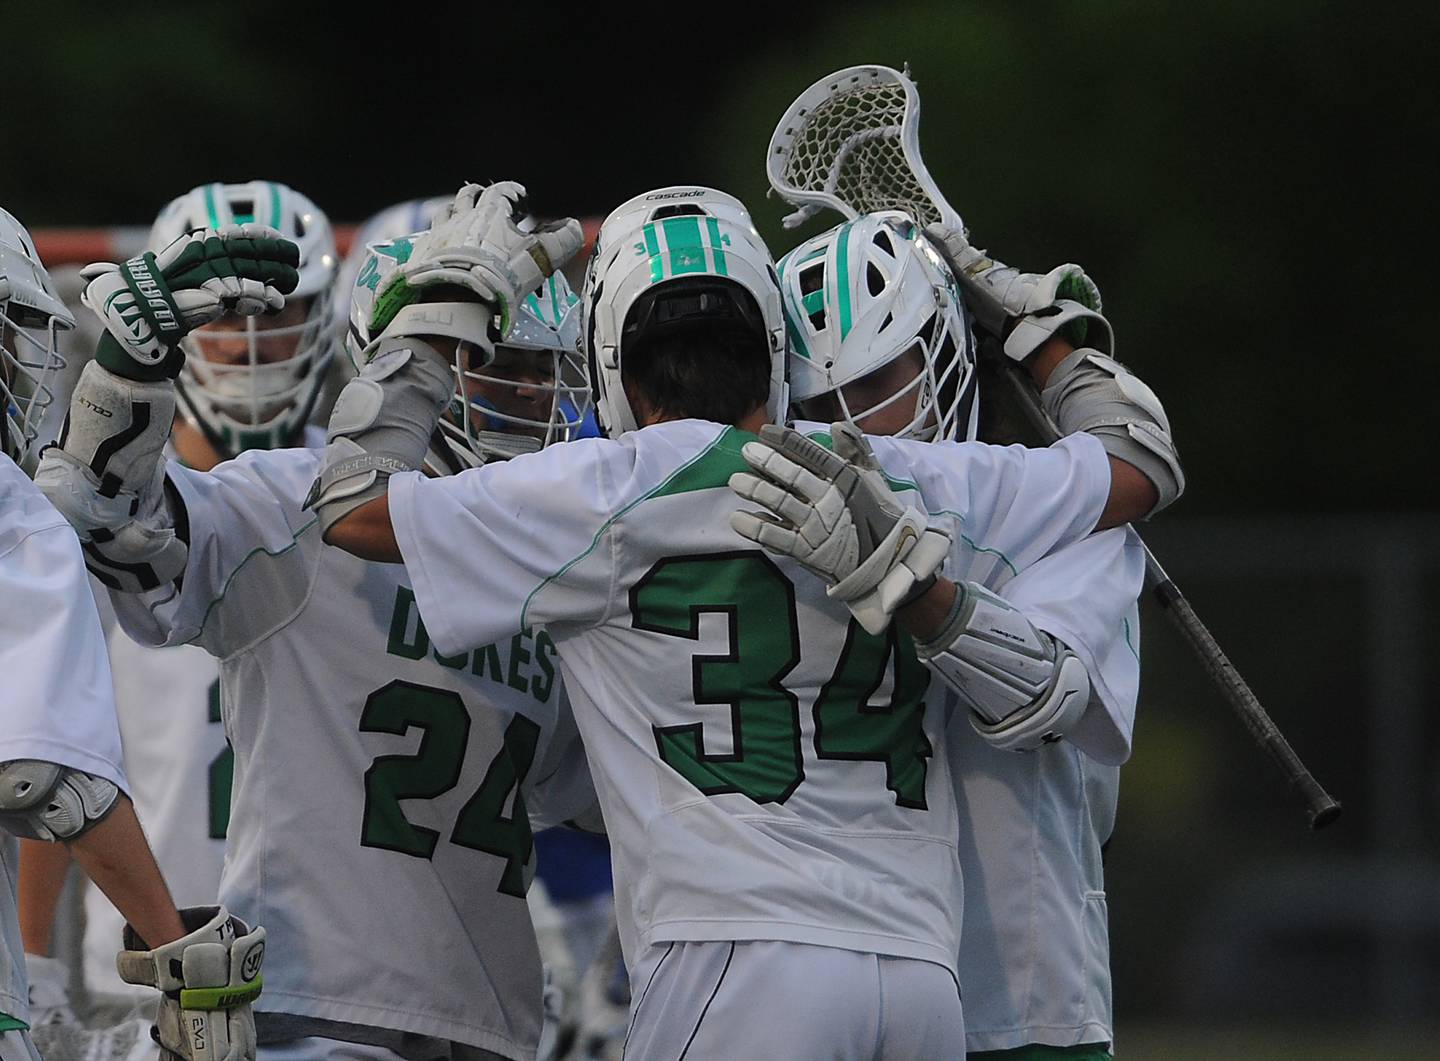 York's Charlie Toreja celebrates his second goal with his teammates in the first period at the boys lacrosse state semifinals at Robert Morris University football field in Arlington Heights on Thursday